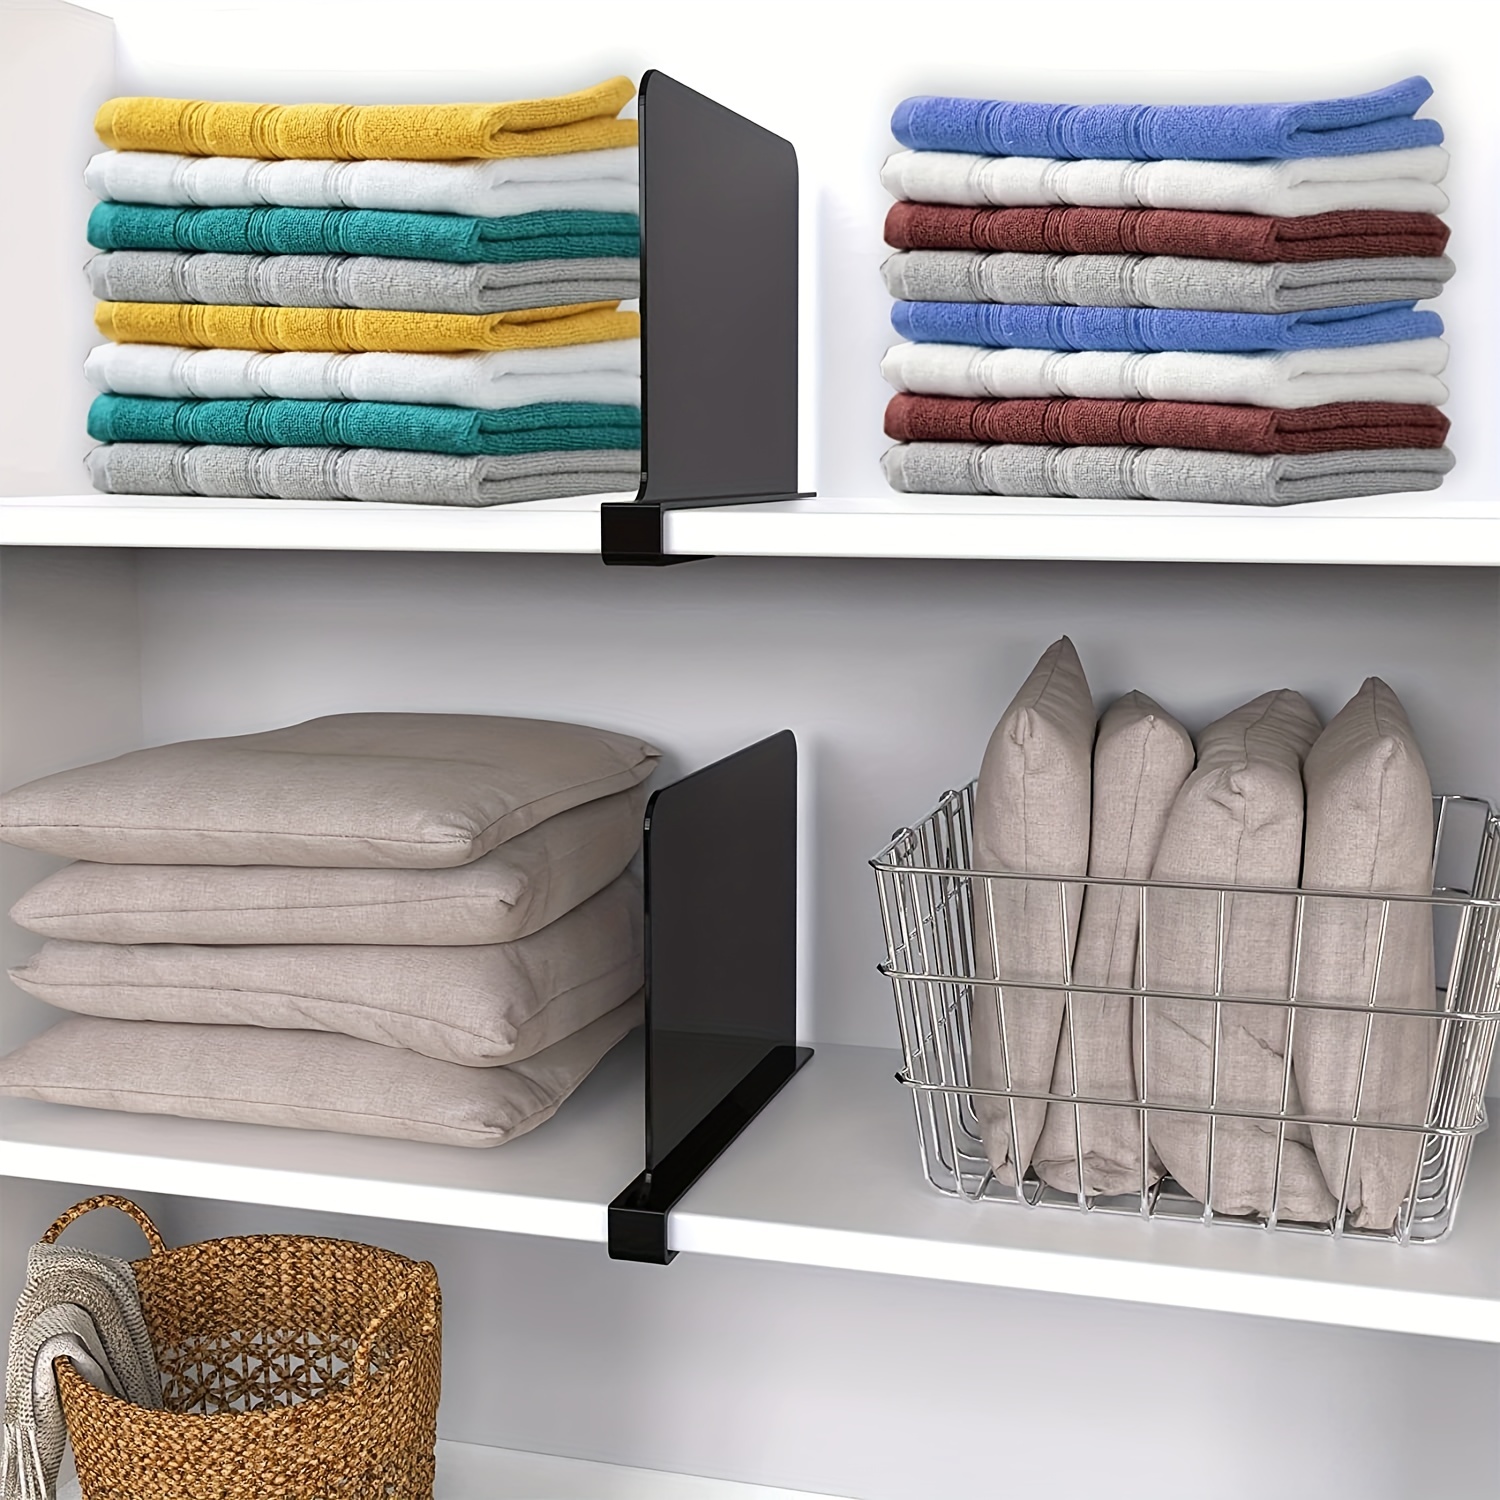 Organize Your Closet With Acrylic Shelf Dividers - Easy To Install